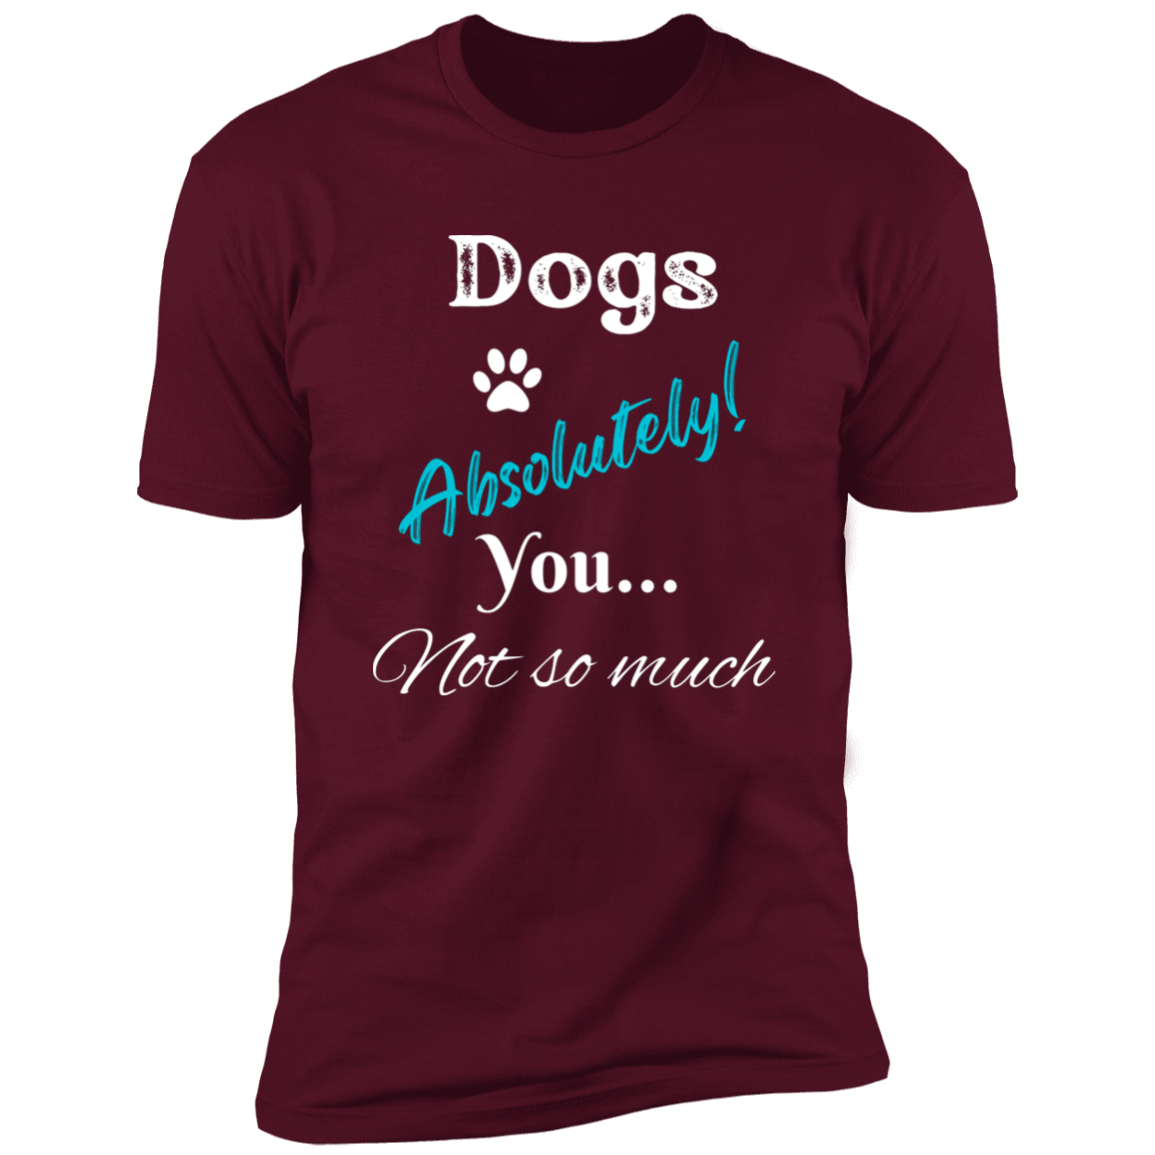 Dogs Absolutely! You Not So Much T-shirt, funny dog shirt dog shirt for humans, in maroon